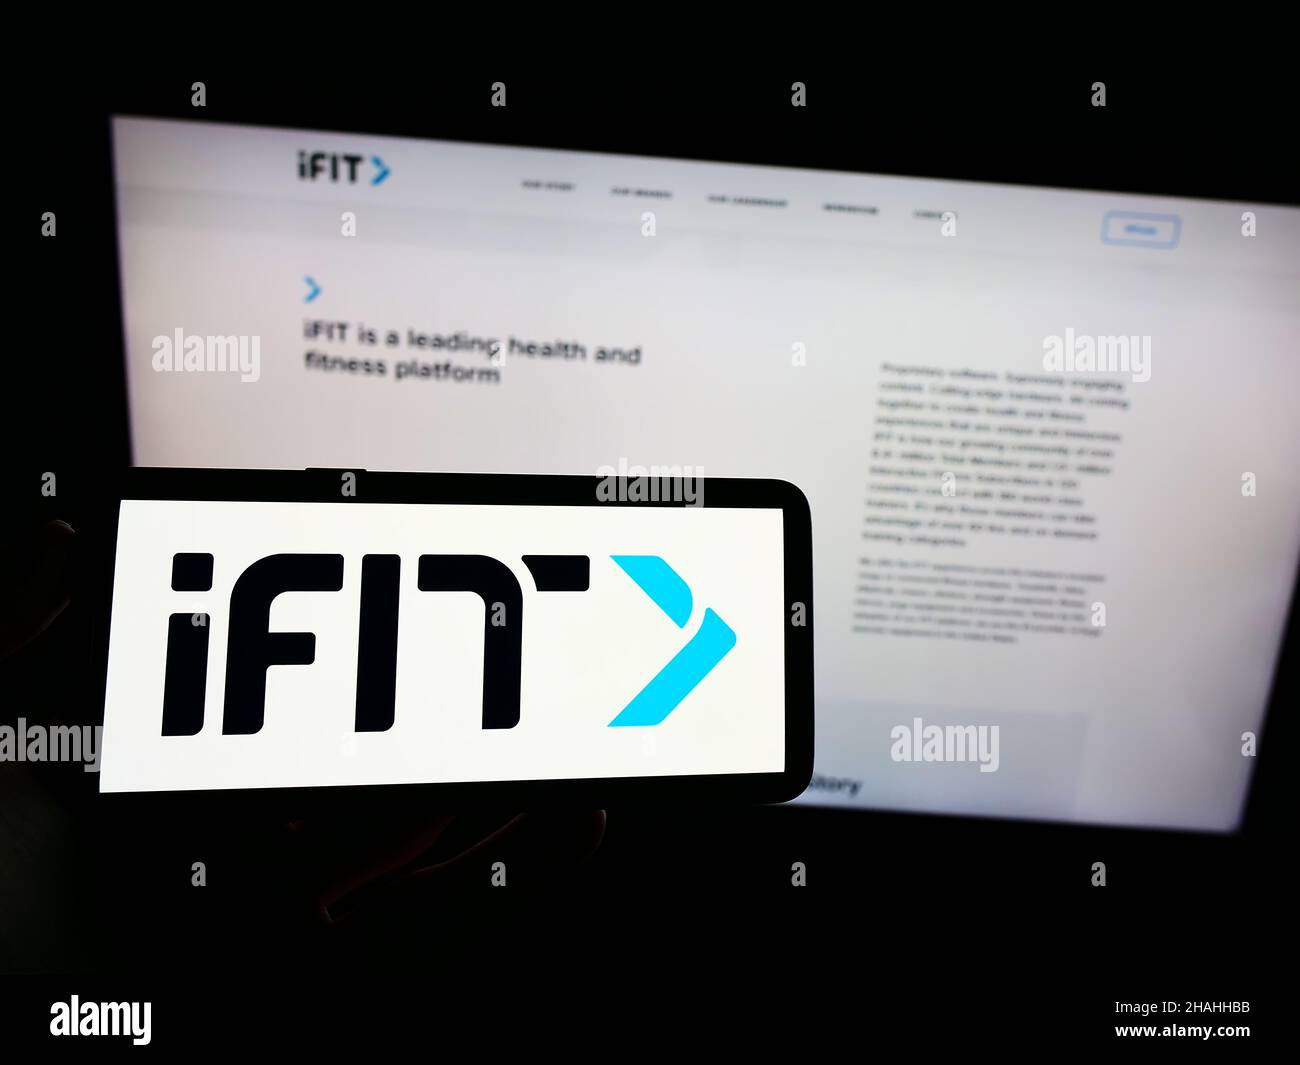 Person holding mobile phone with logo of American fitness company iFIT Inc. on screen in front of business web page. Focus on phone display. Stock Photo